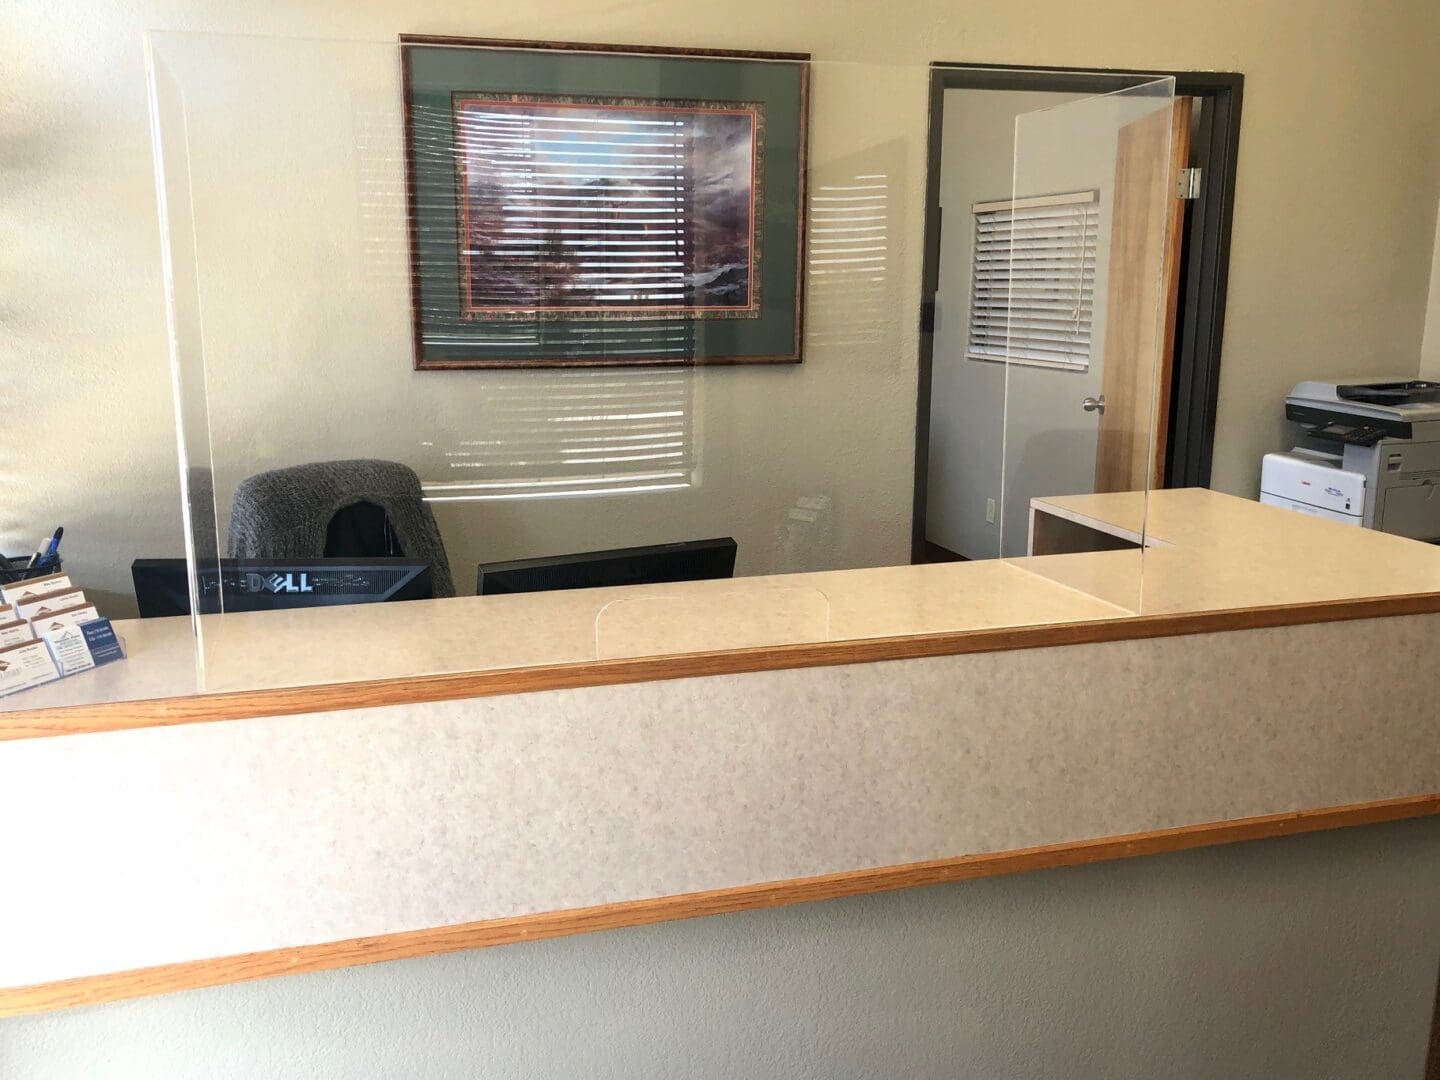 A reception desk with a chair and a window